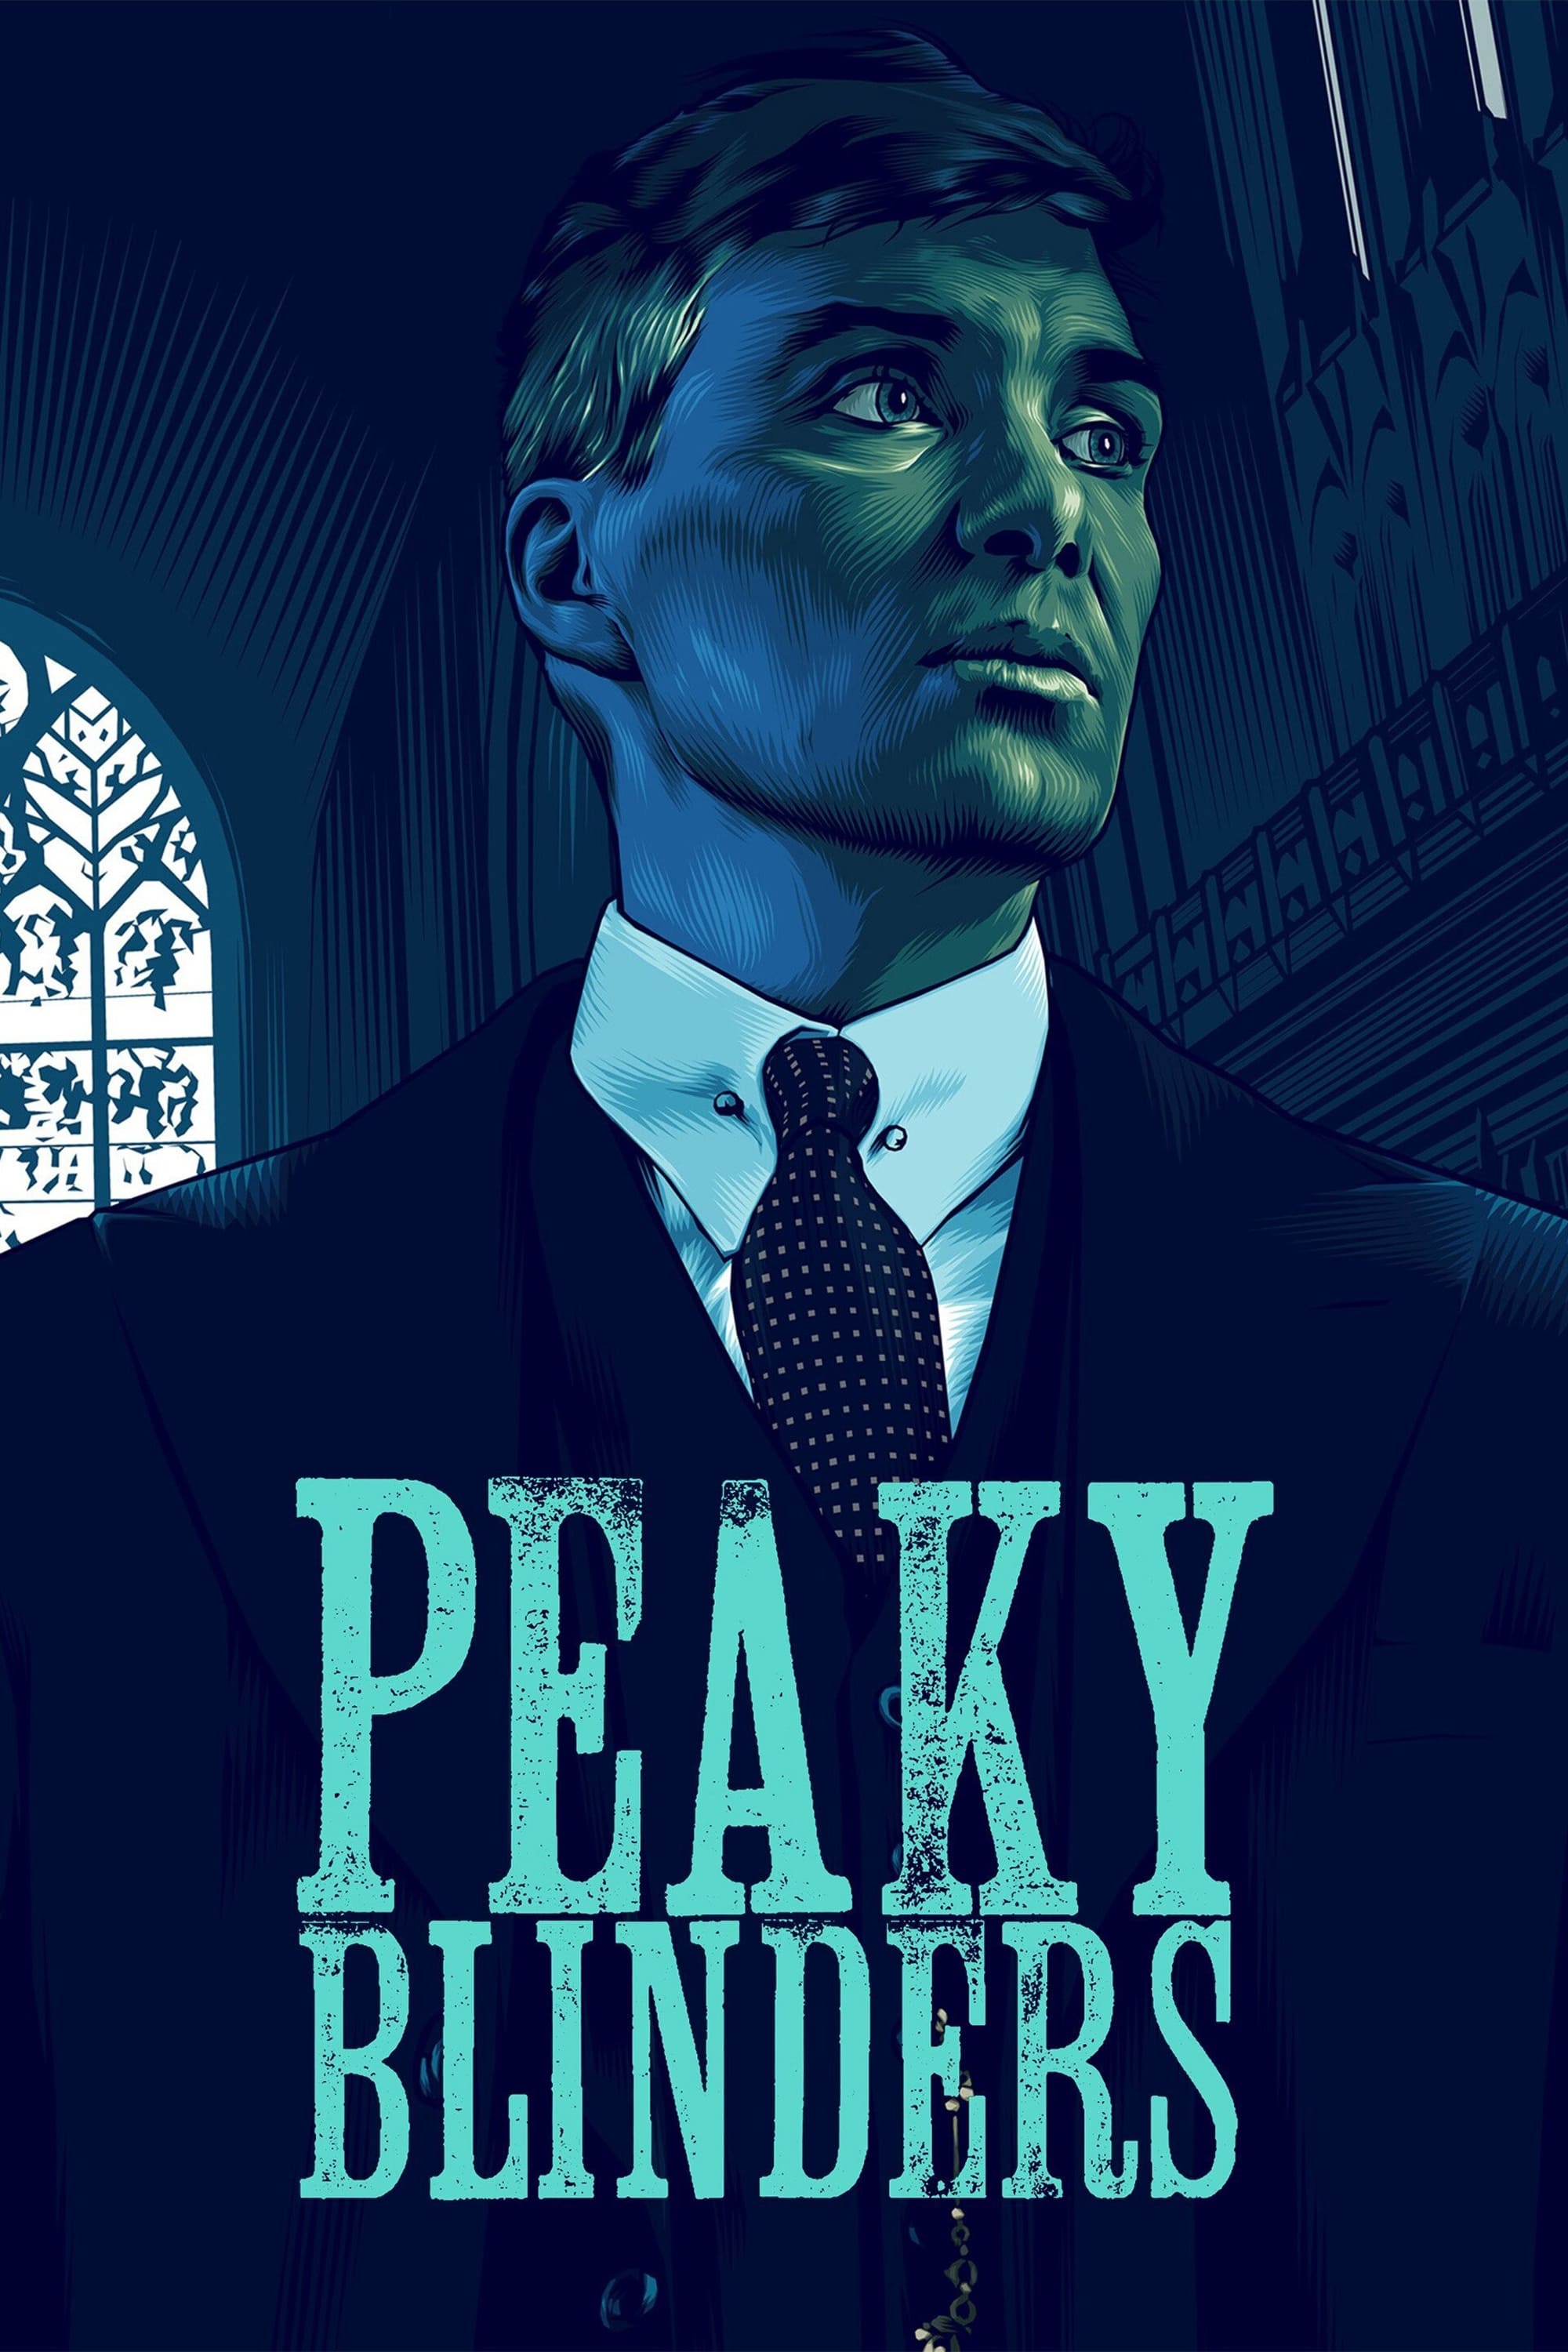 Poster Affiche Peaky Blinders The Shelby Family Gang Mafia Irlande Serie TV 